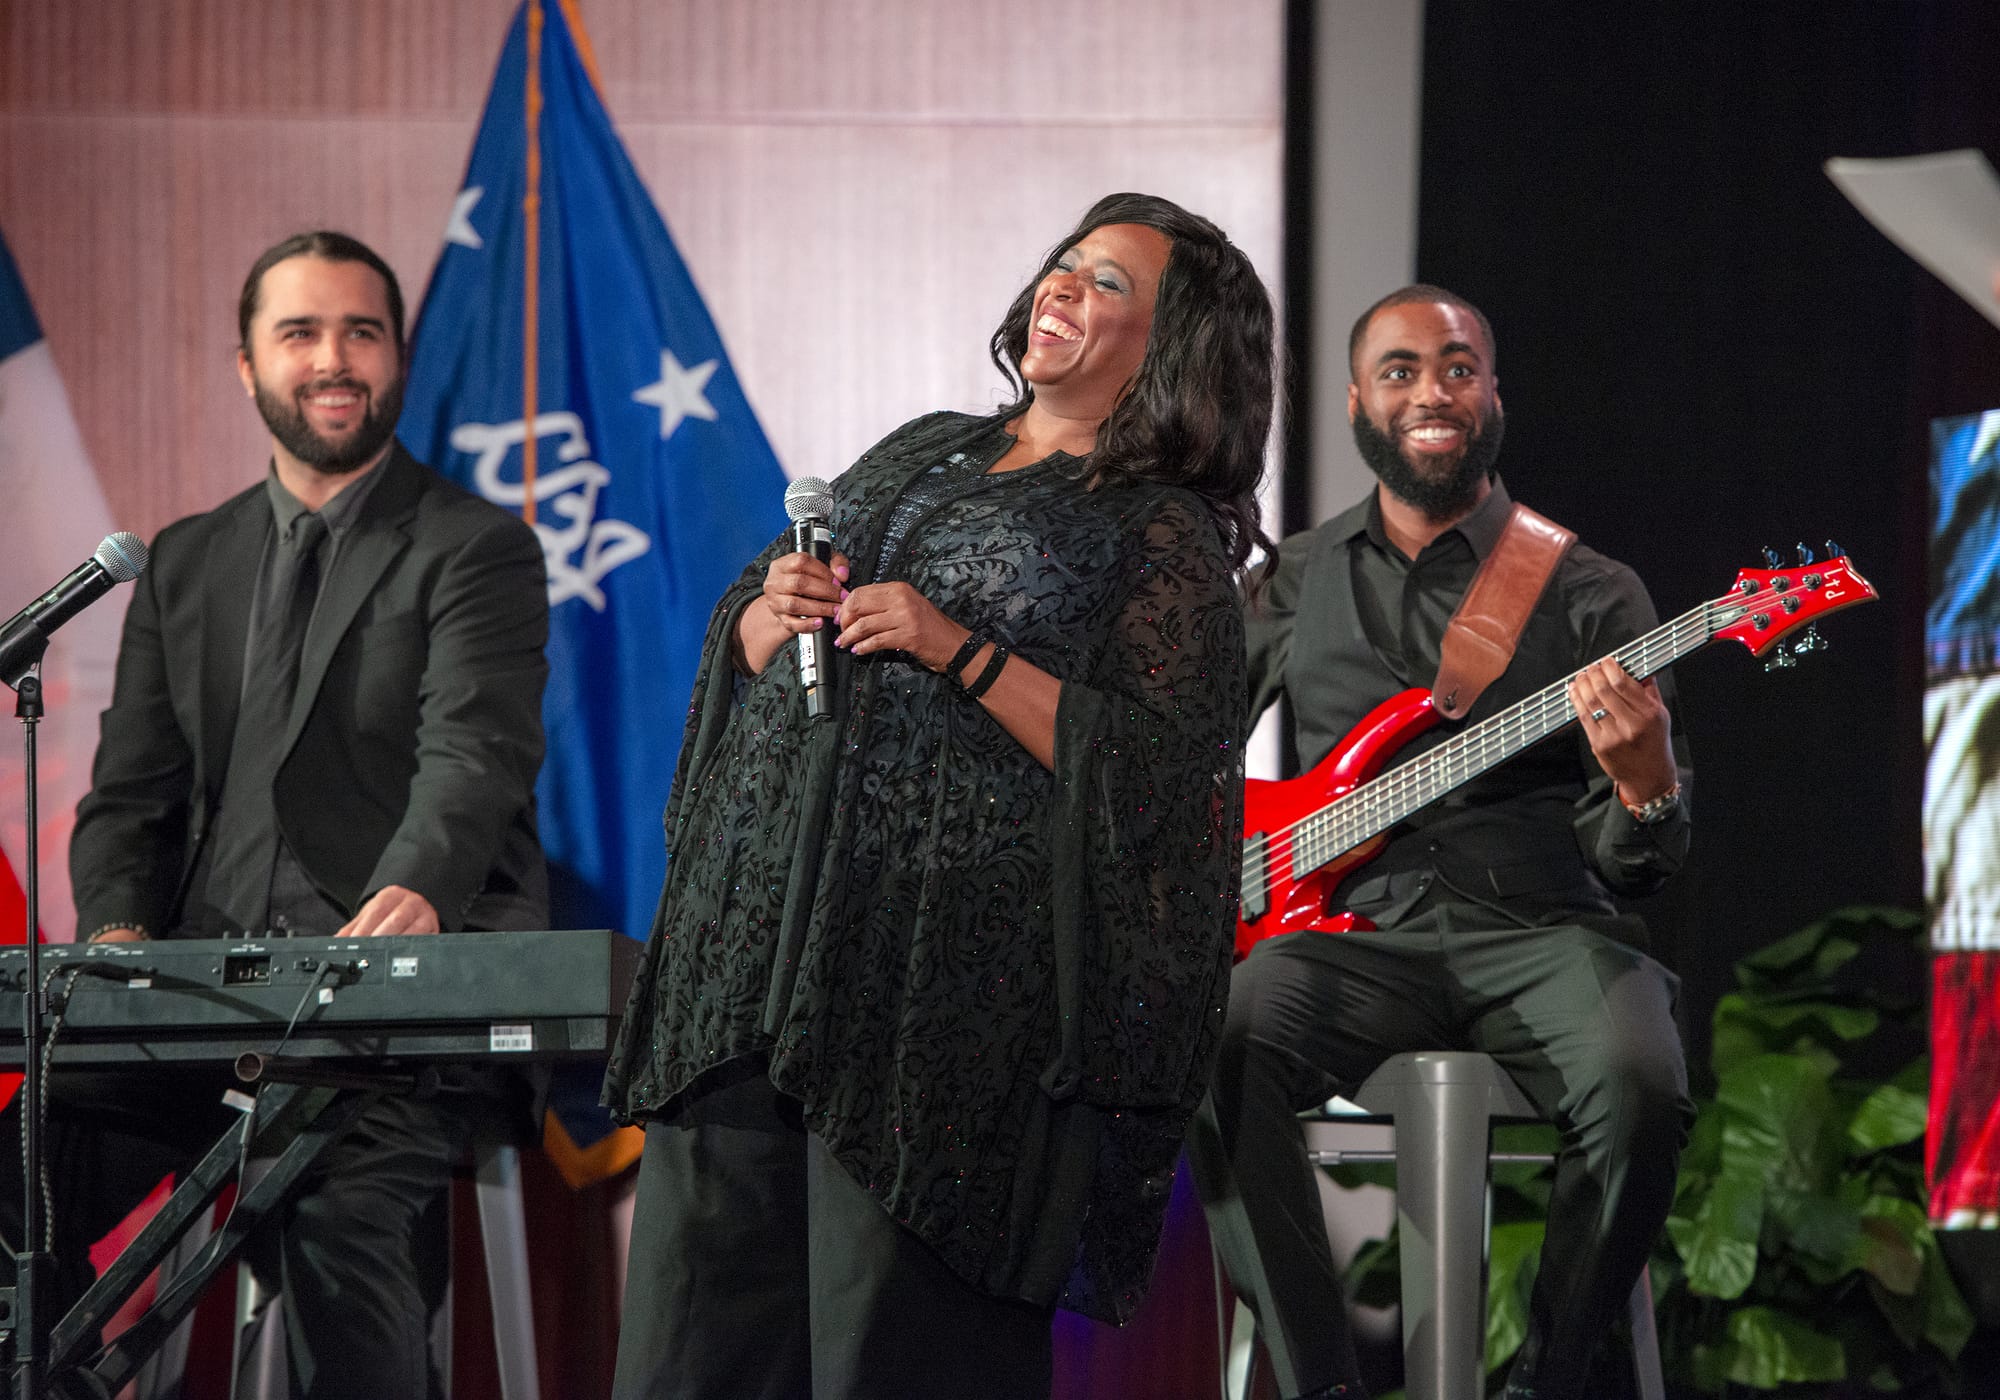 Matchmaker Band members welcome Motown stars to the stage with a Motown groove.